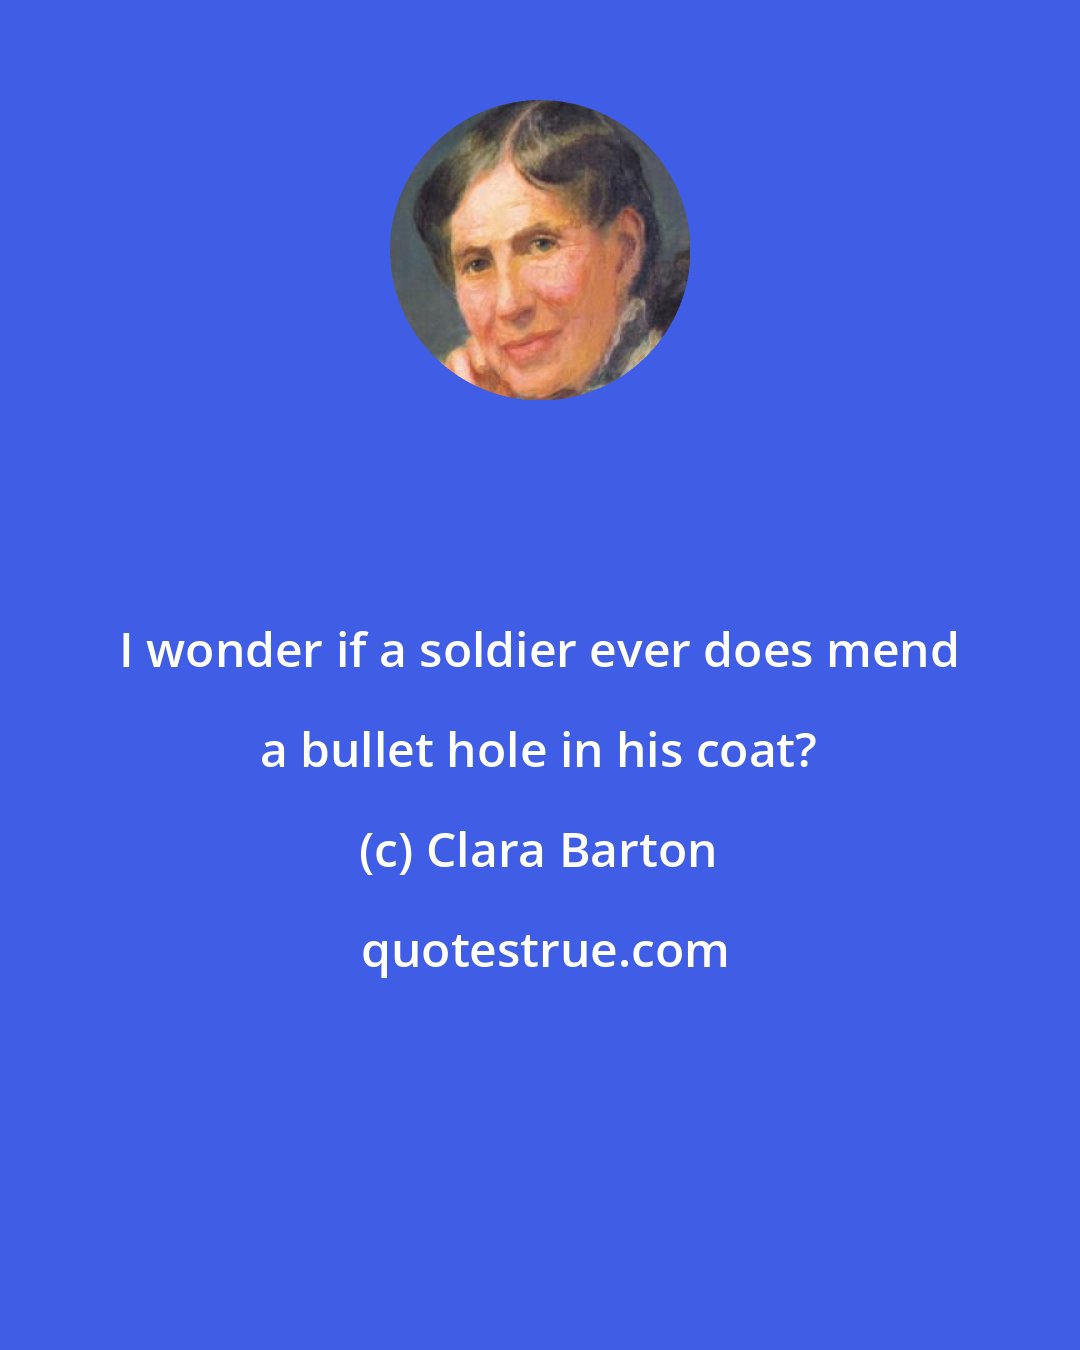 Clara Barton: I wonder if a soldier ever does mend a bullet hole in his coat?